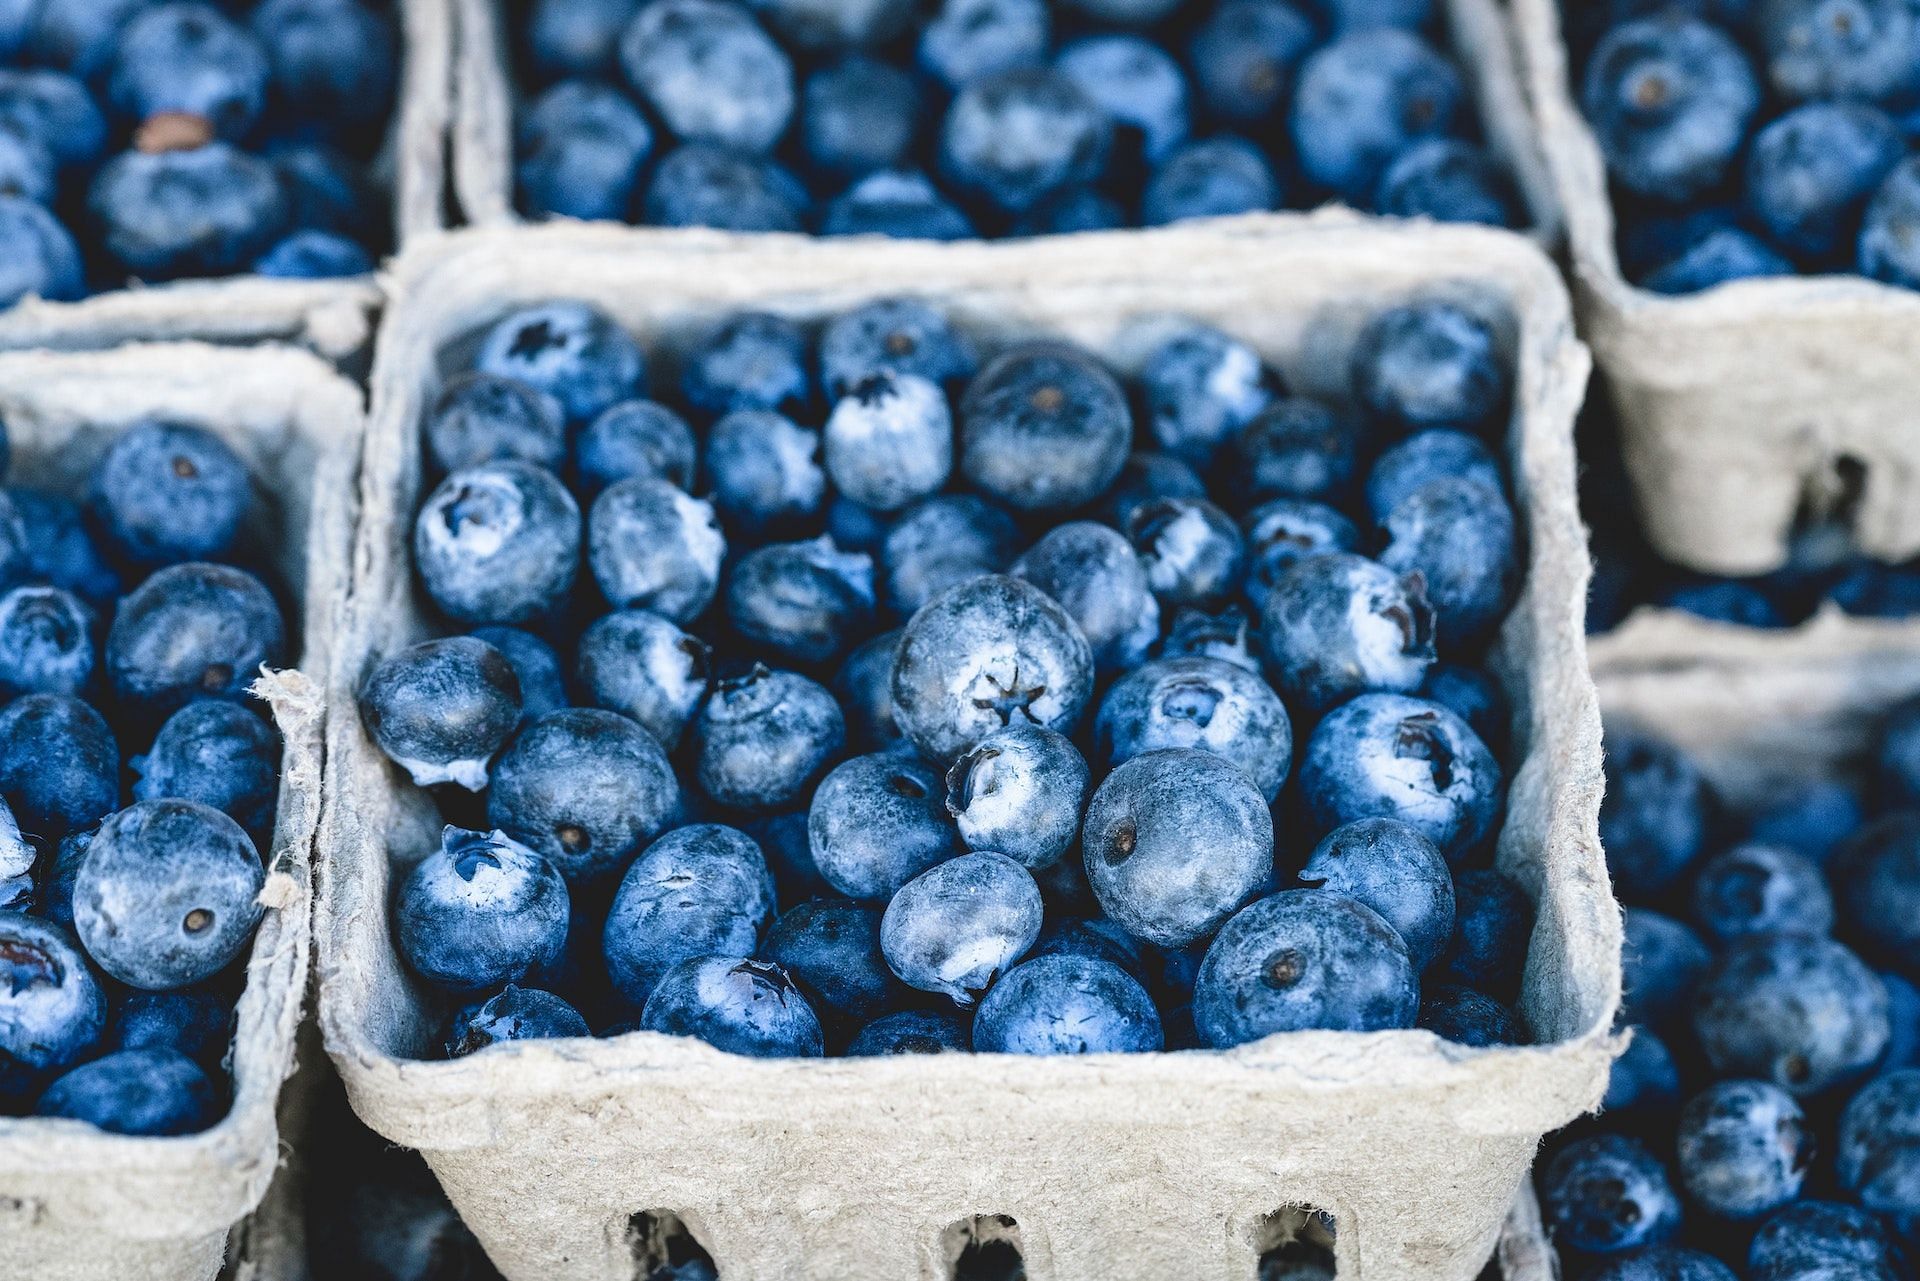 There are several health benefits of blueberries. (Photo via Pexels/veeterzy)